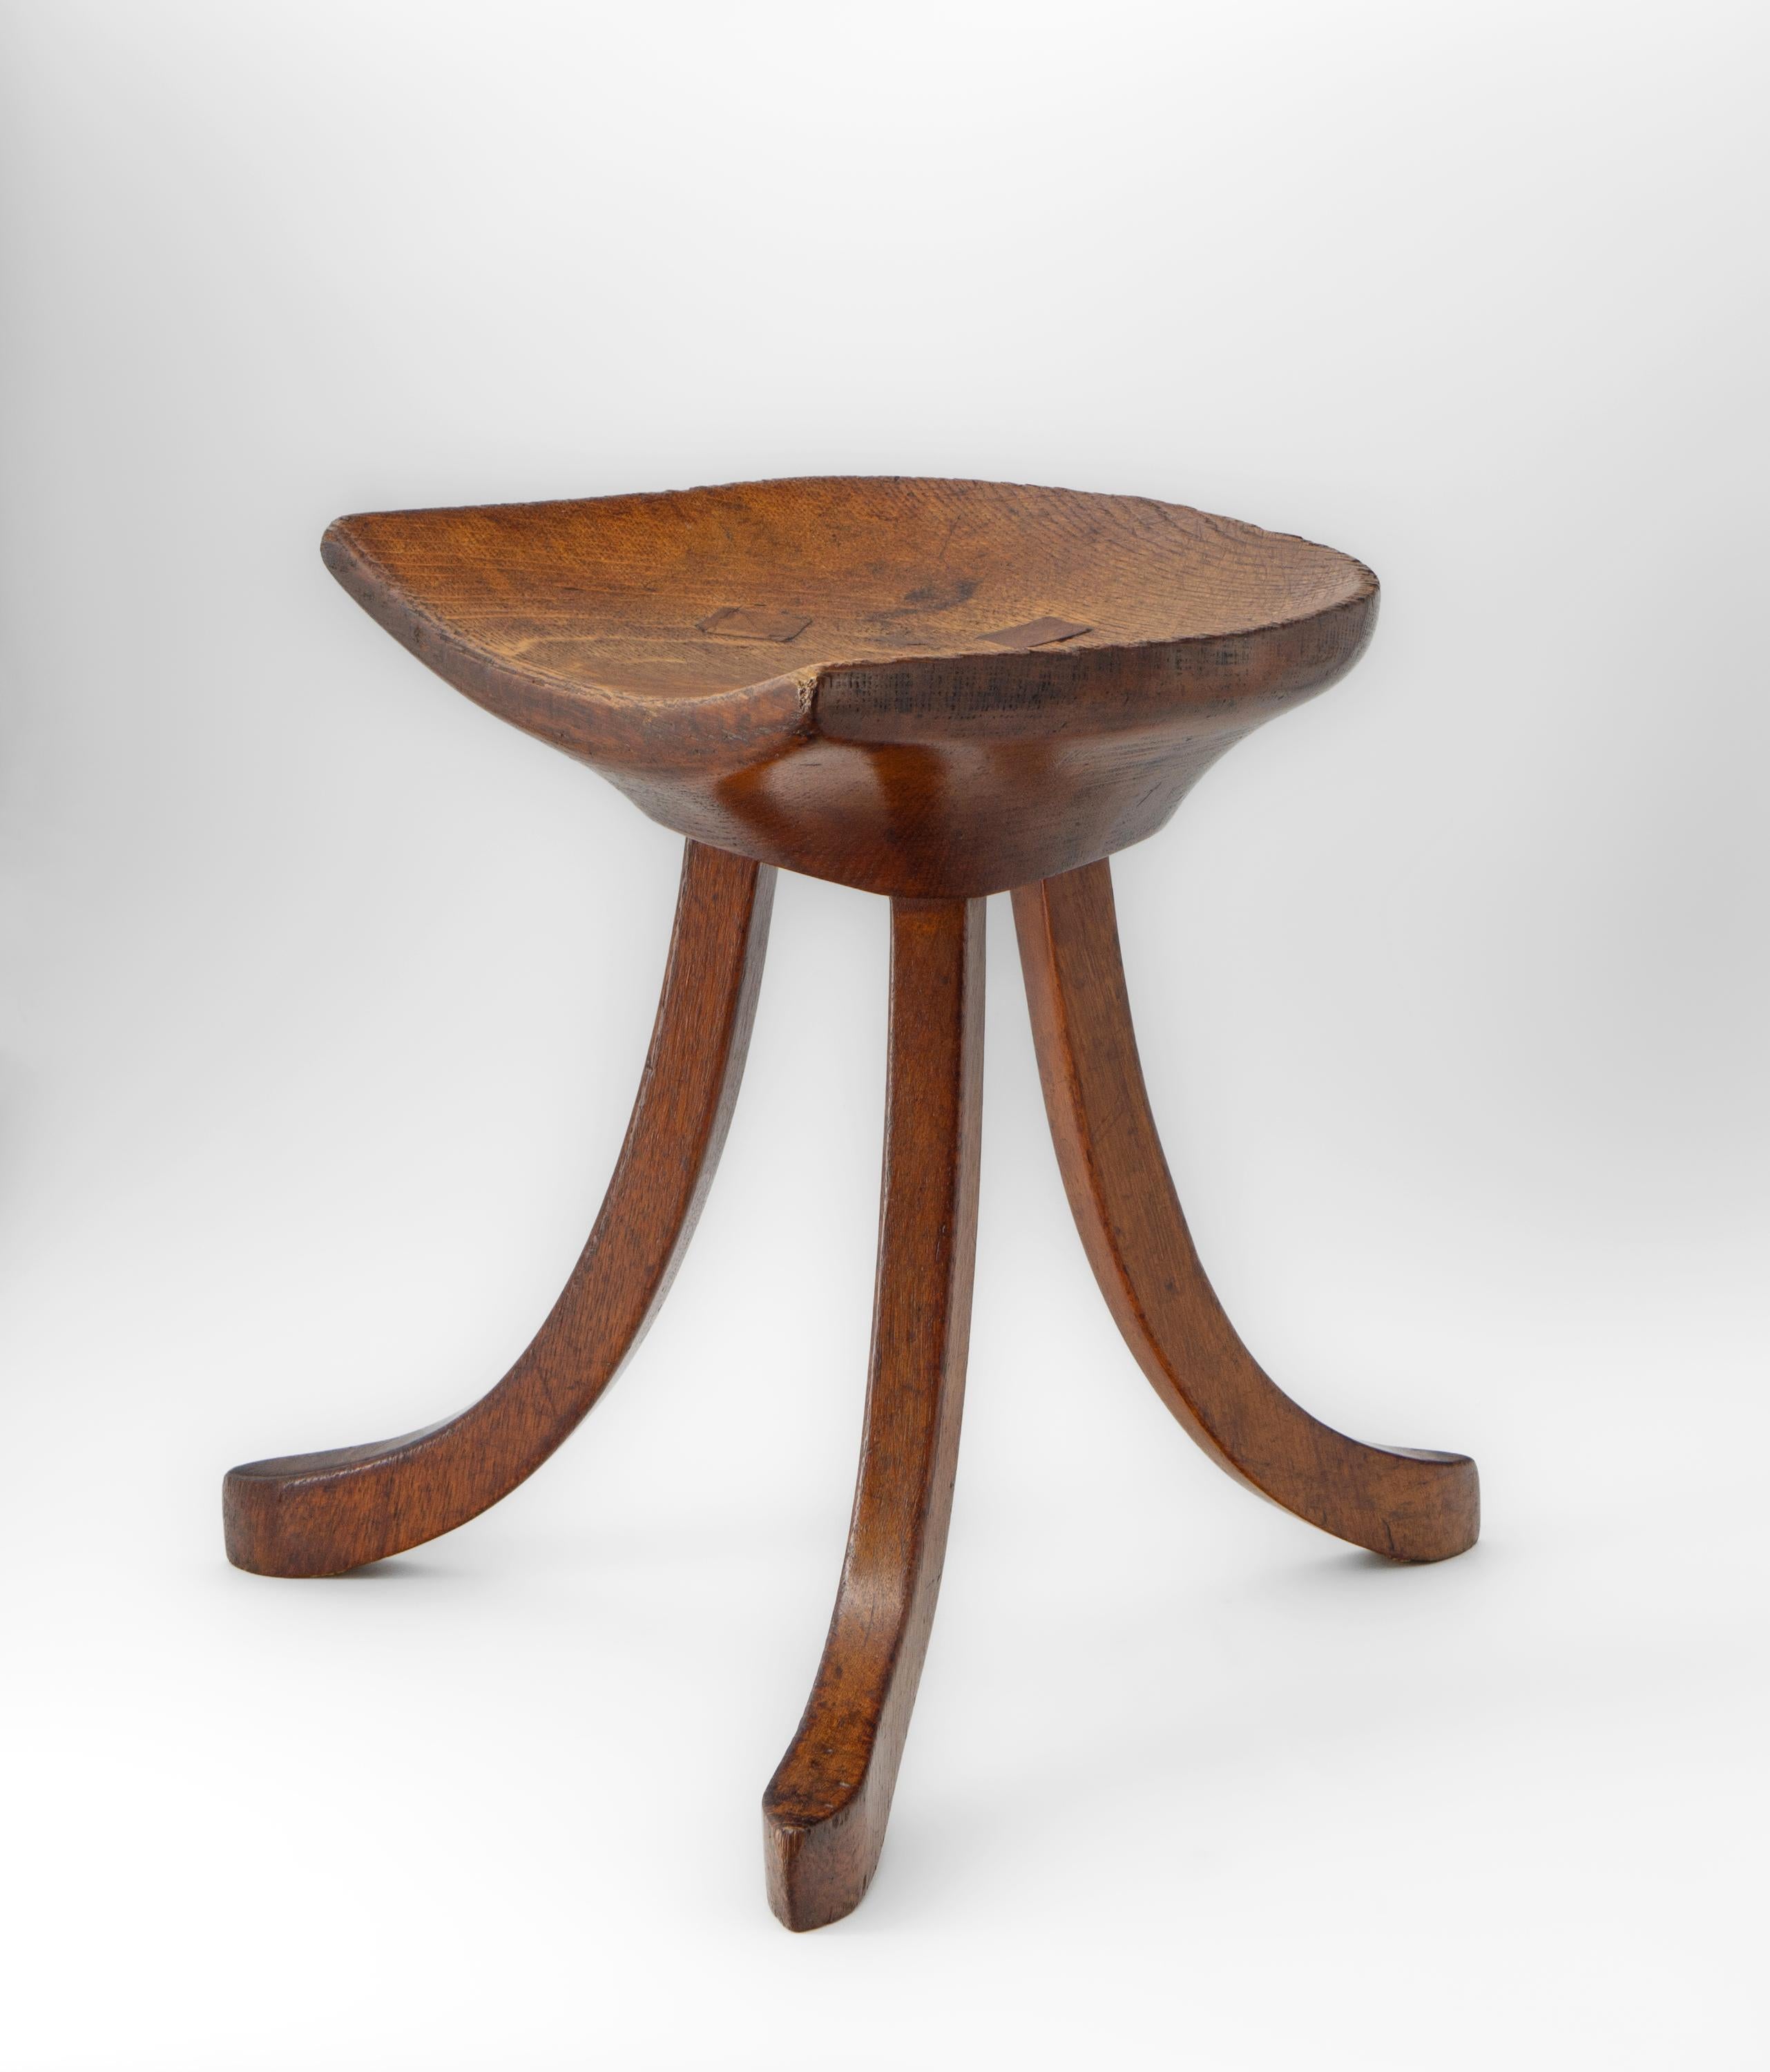 British Liberty & Co Oak Thebes Stool Circa 1915. For Sale